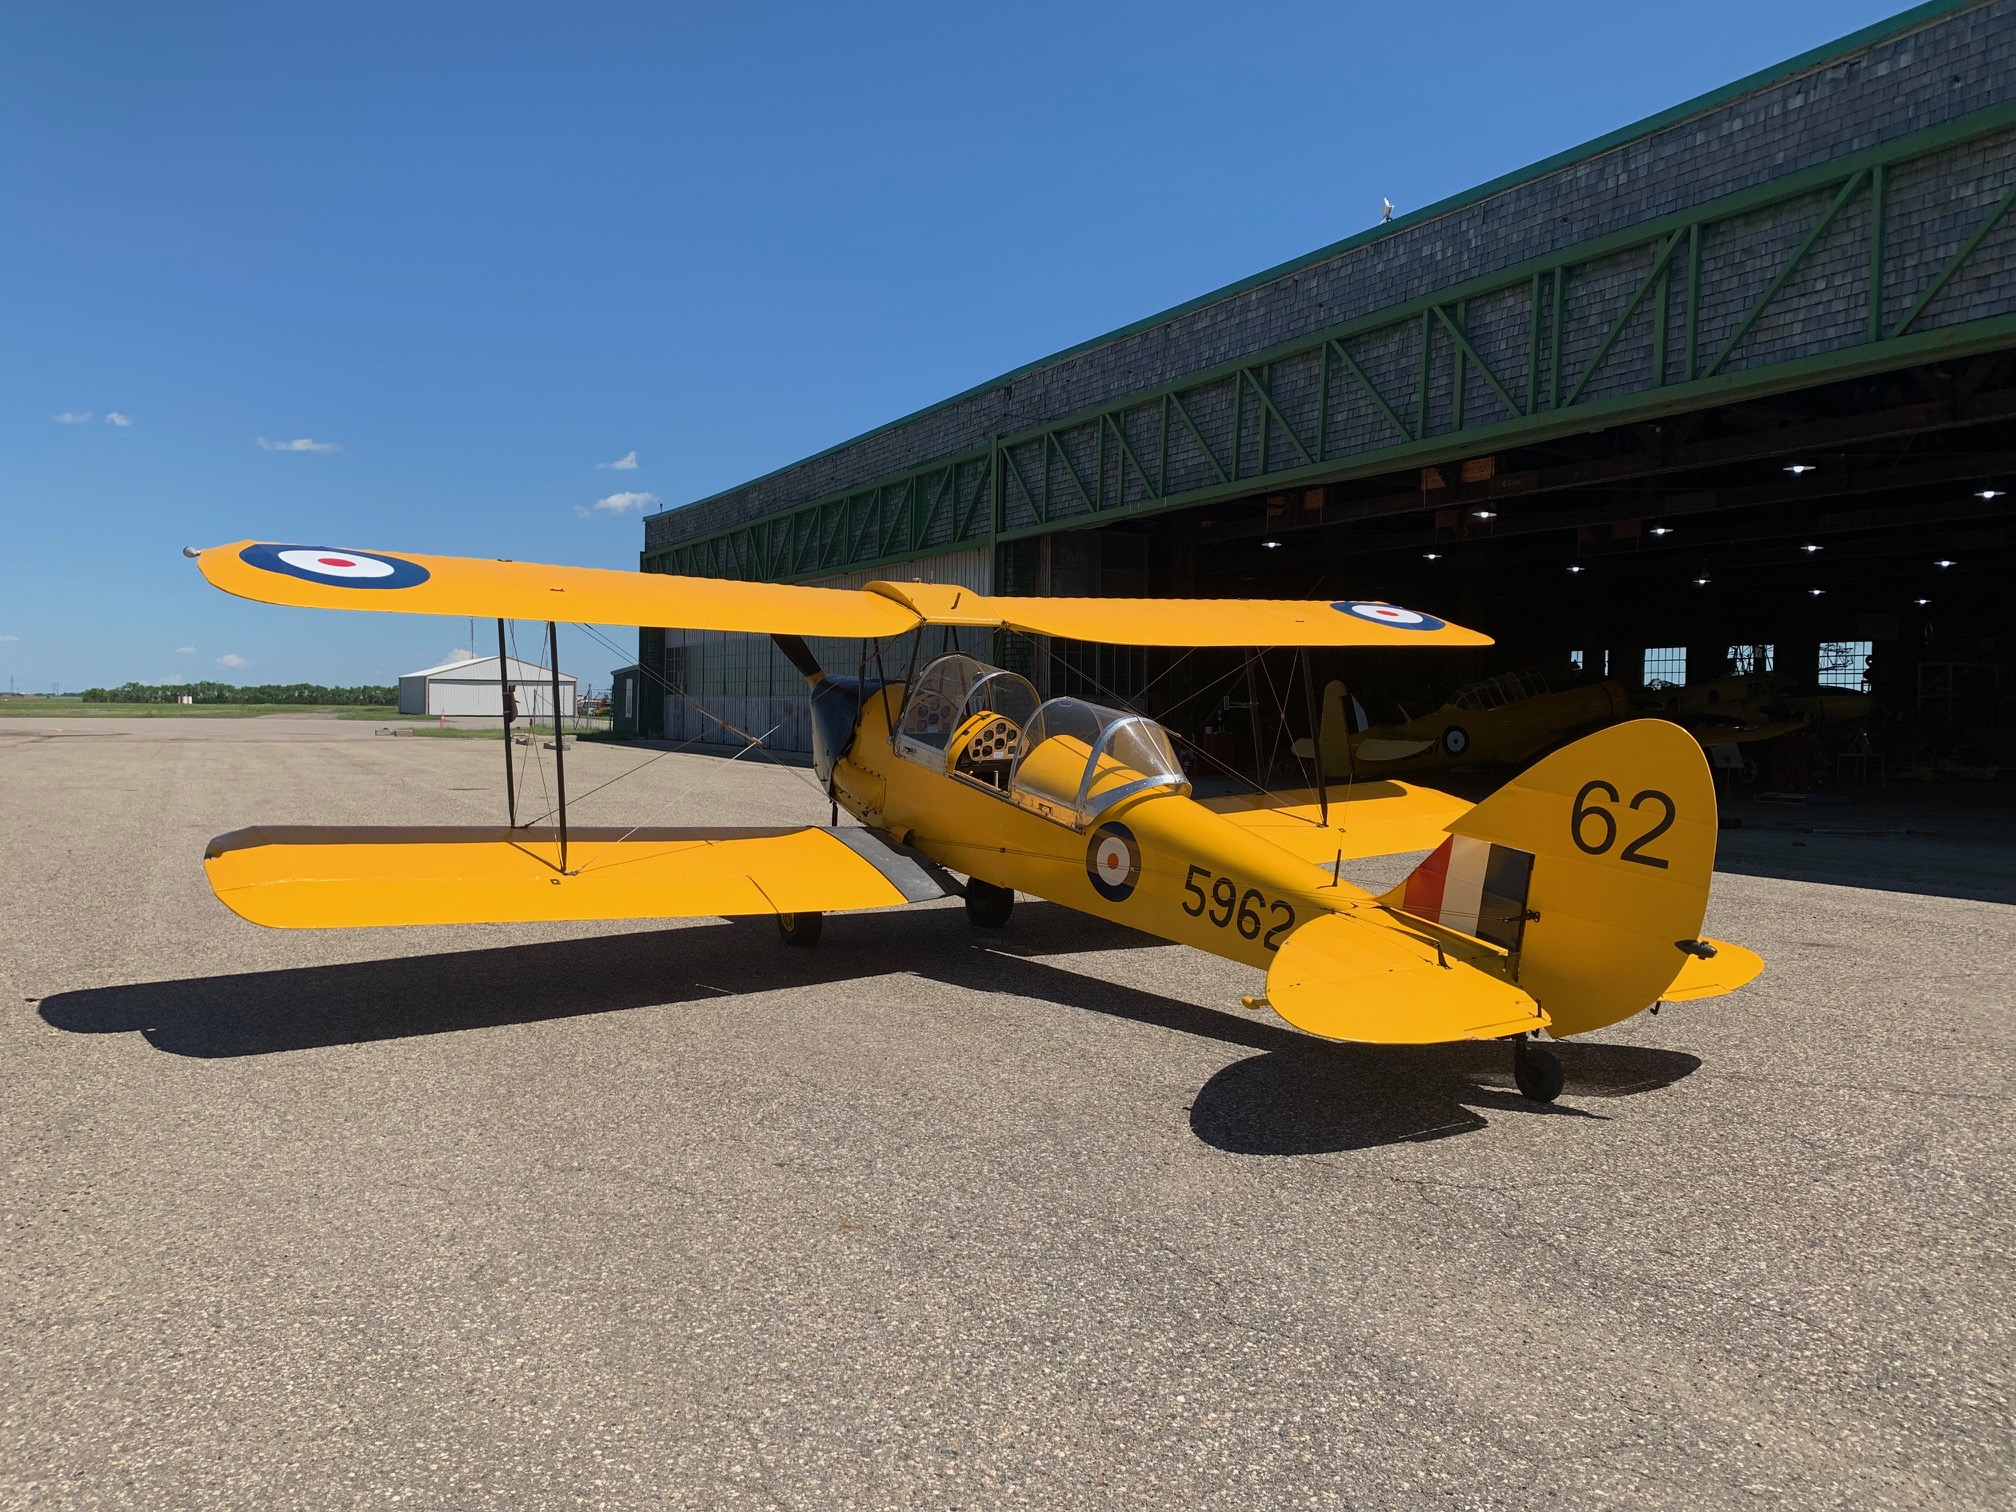 A Canadian DeHavilland Tiger Moth sits on the tarmac outside a hangar. The aircraft is bright yellow and decorated with RCAF roundels. On the tail, the number '62' appears.